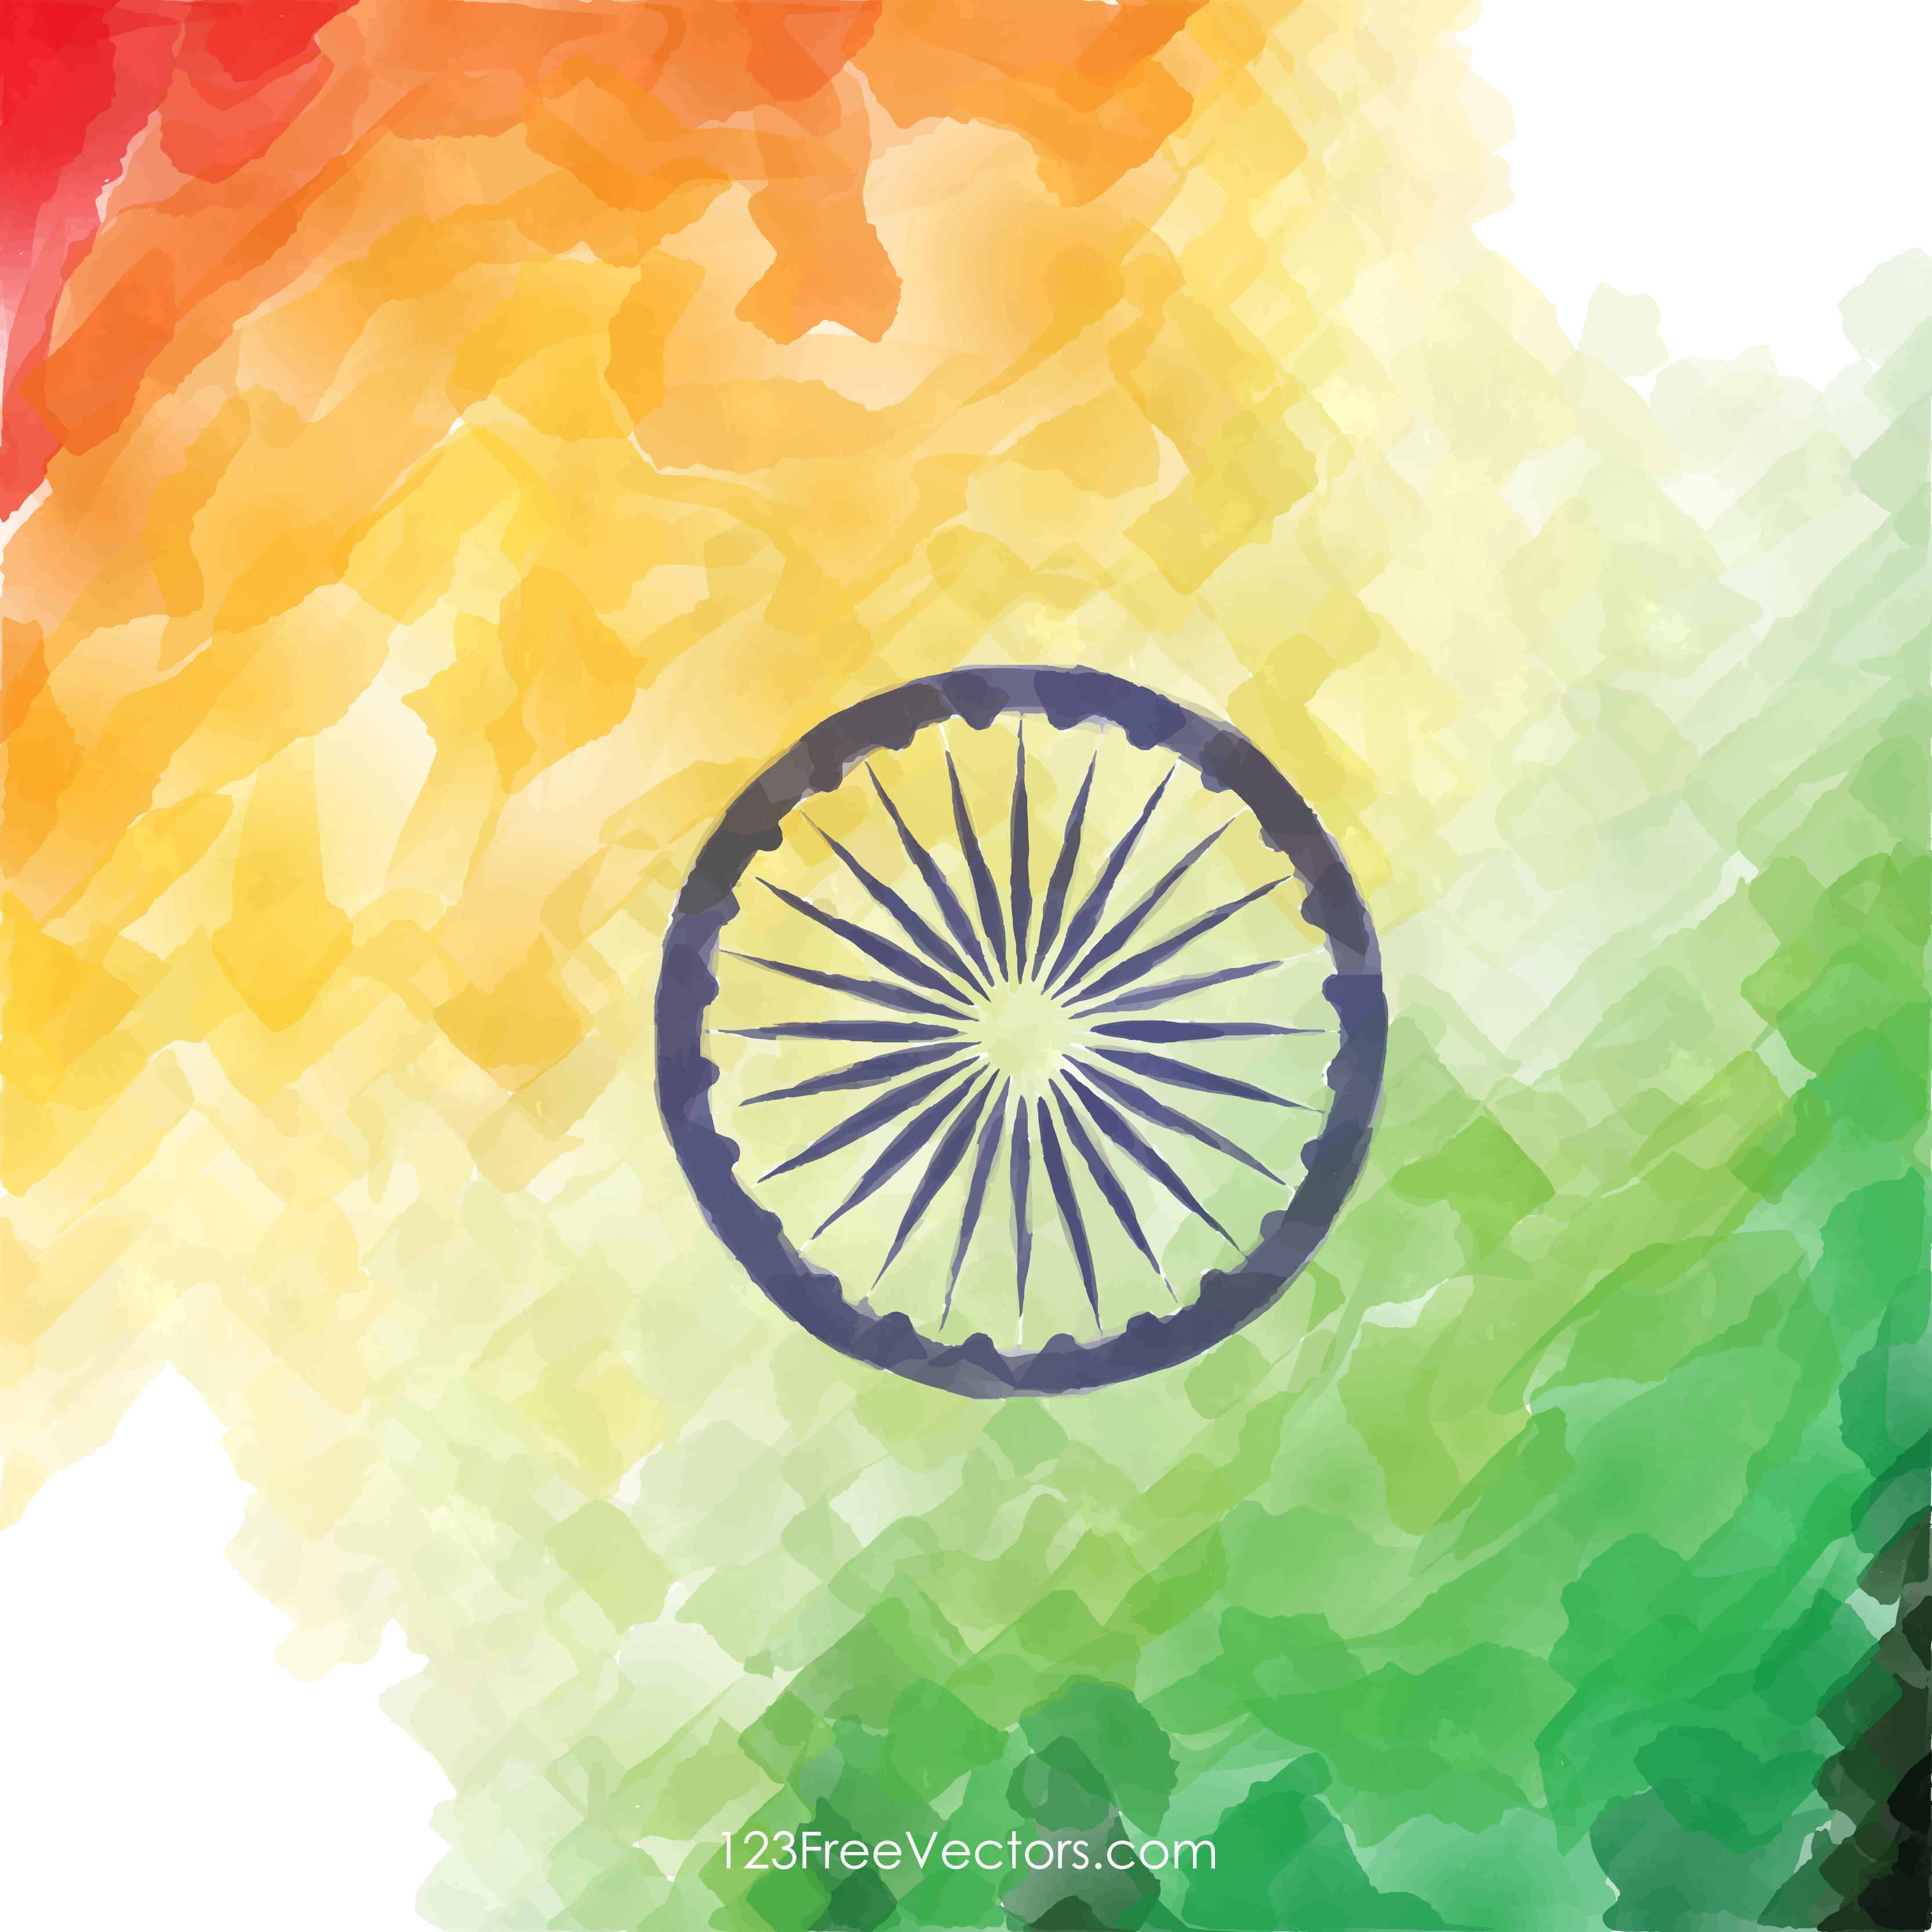 Creative Watercolor Indian Flag Background Image.